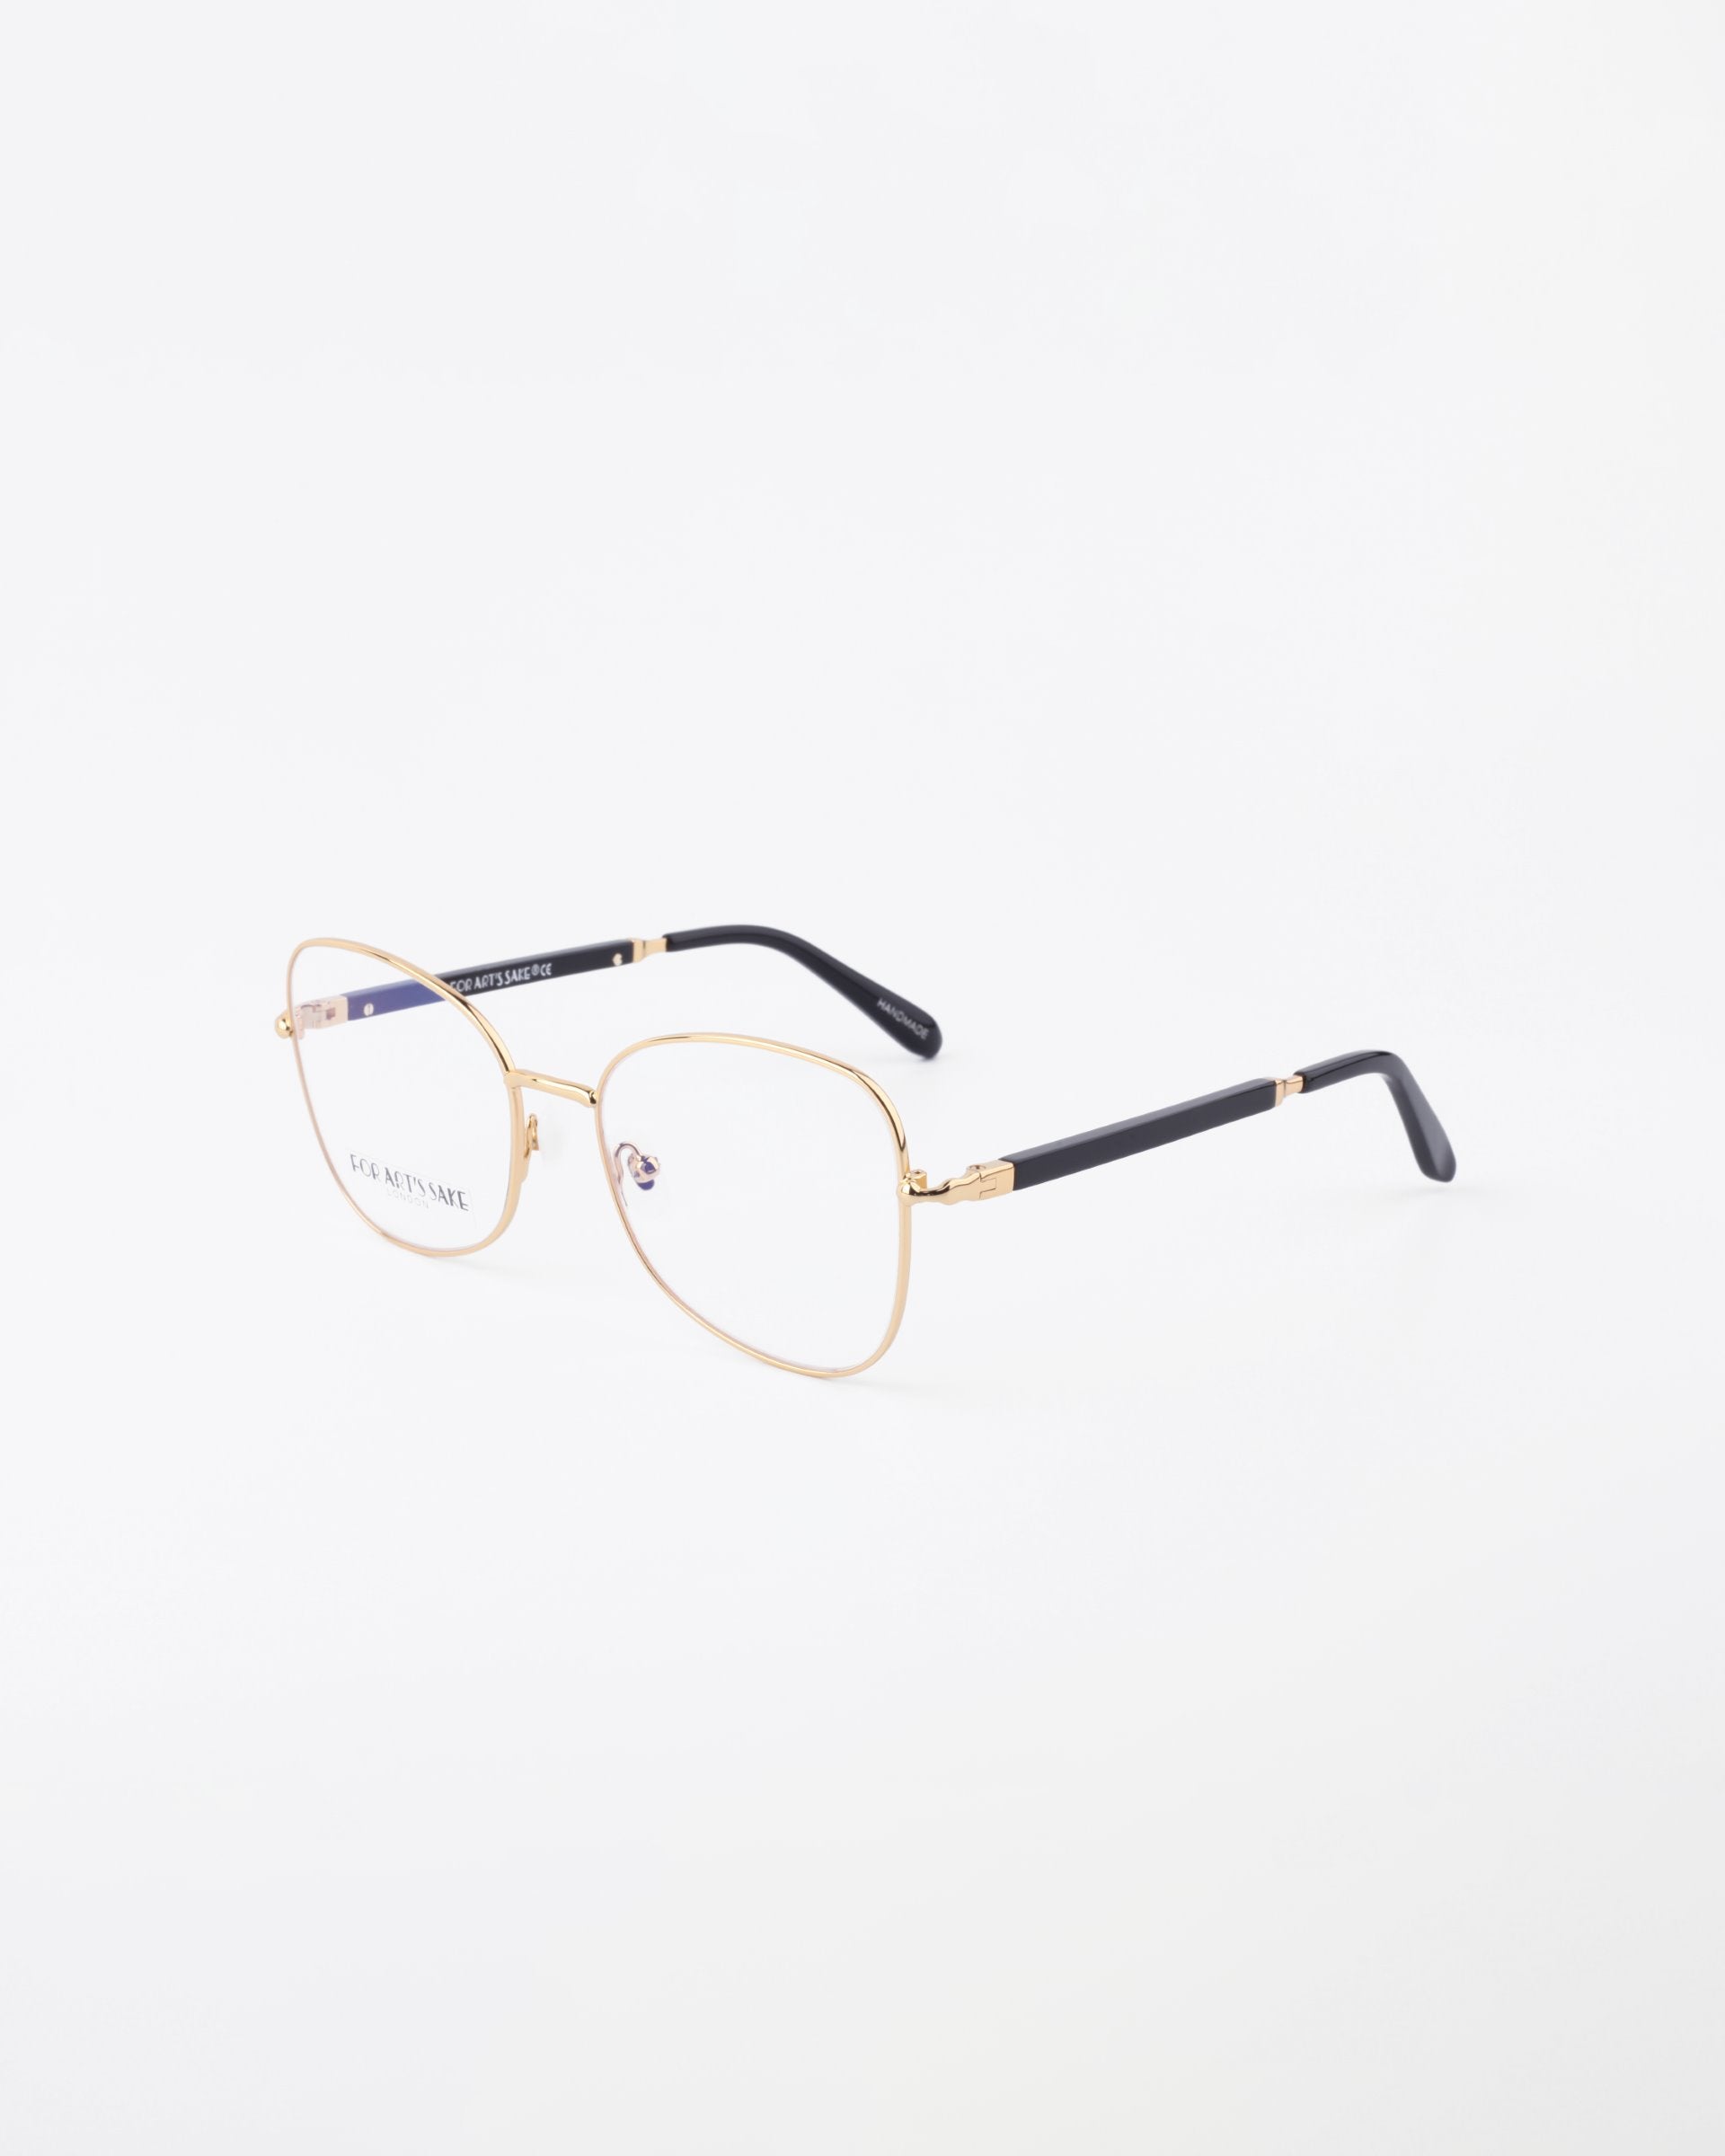 A pair of thin, 18-karat gold-plated eyeglasses displayed on a white background. The Grace glasses from For Art&#39;s Sake® have square lenses with black temple tips and small nose pads attached to the bridge for added comfort. One of the side arms is partially visible, showcasing a sleek black and gold design.